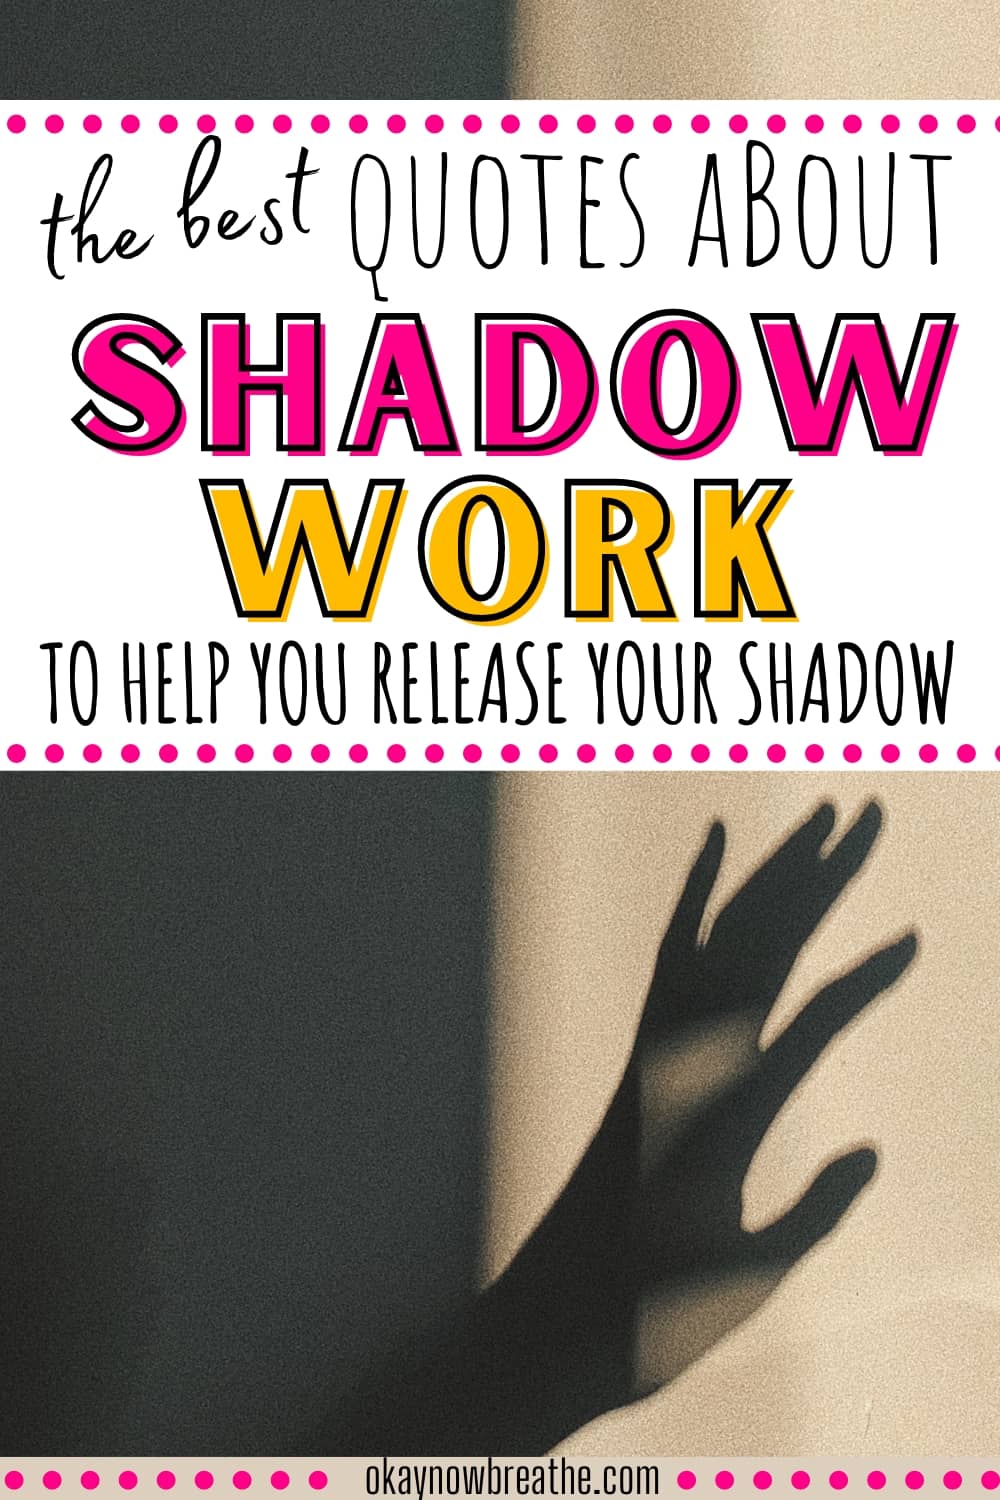 There is a picture with a hand that's a shadow. Half the image is dark. Half the image is light. Above this, there are words that say: the best quotes about shadow work to help you release your shadow.